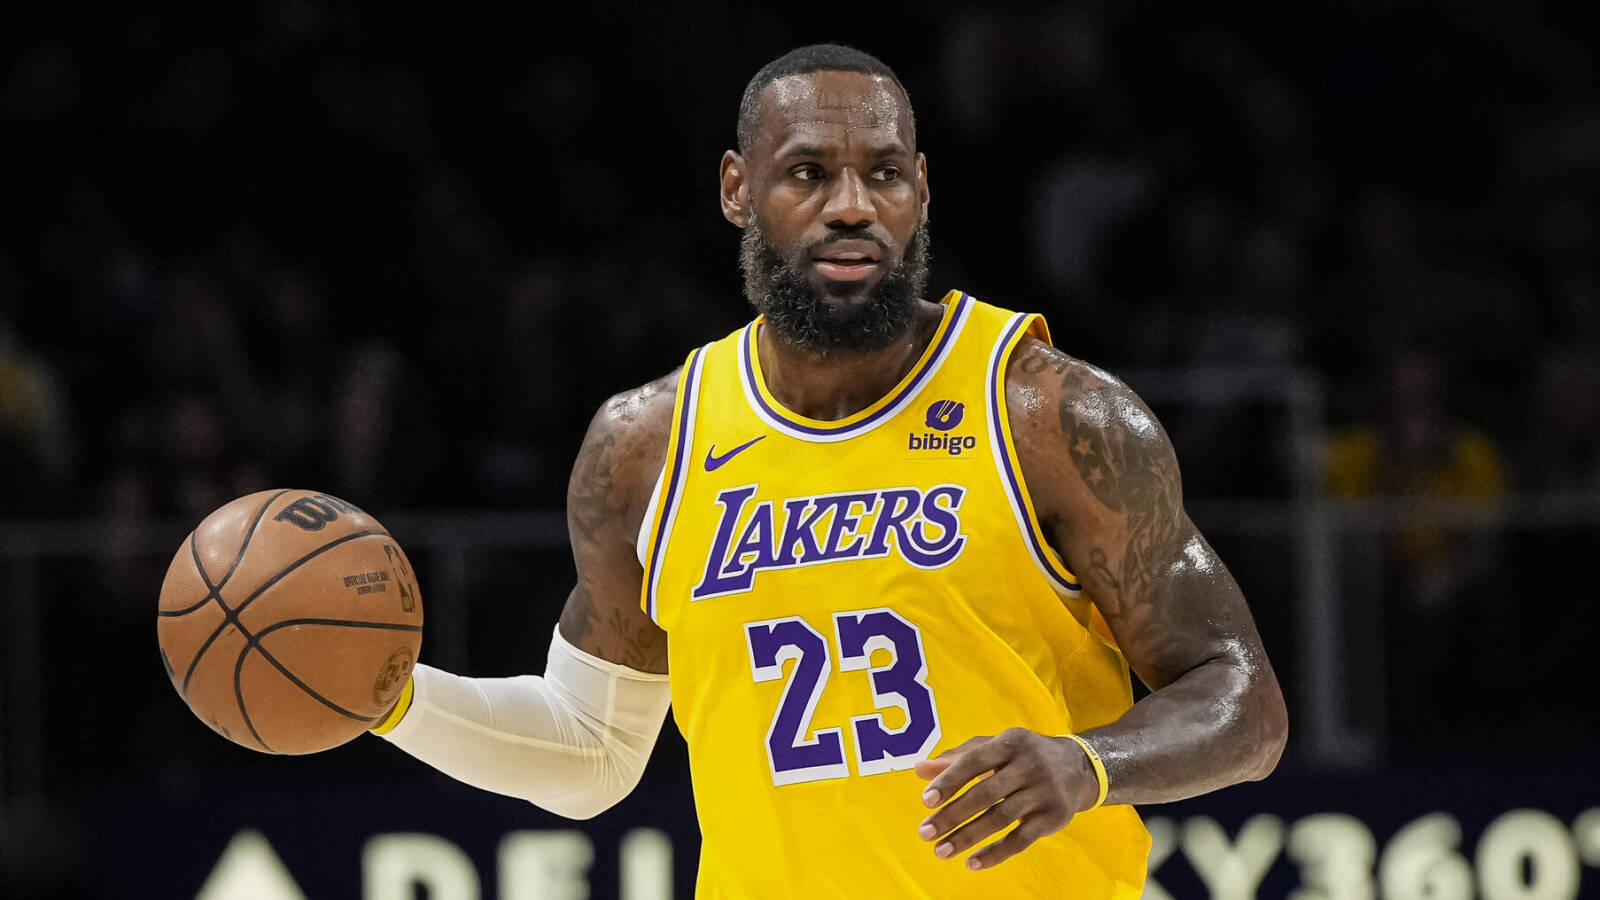 LeBron James made a mistake by turning down Warriors